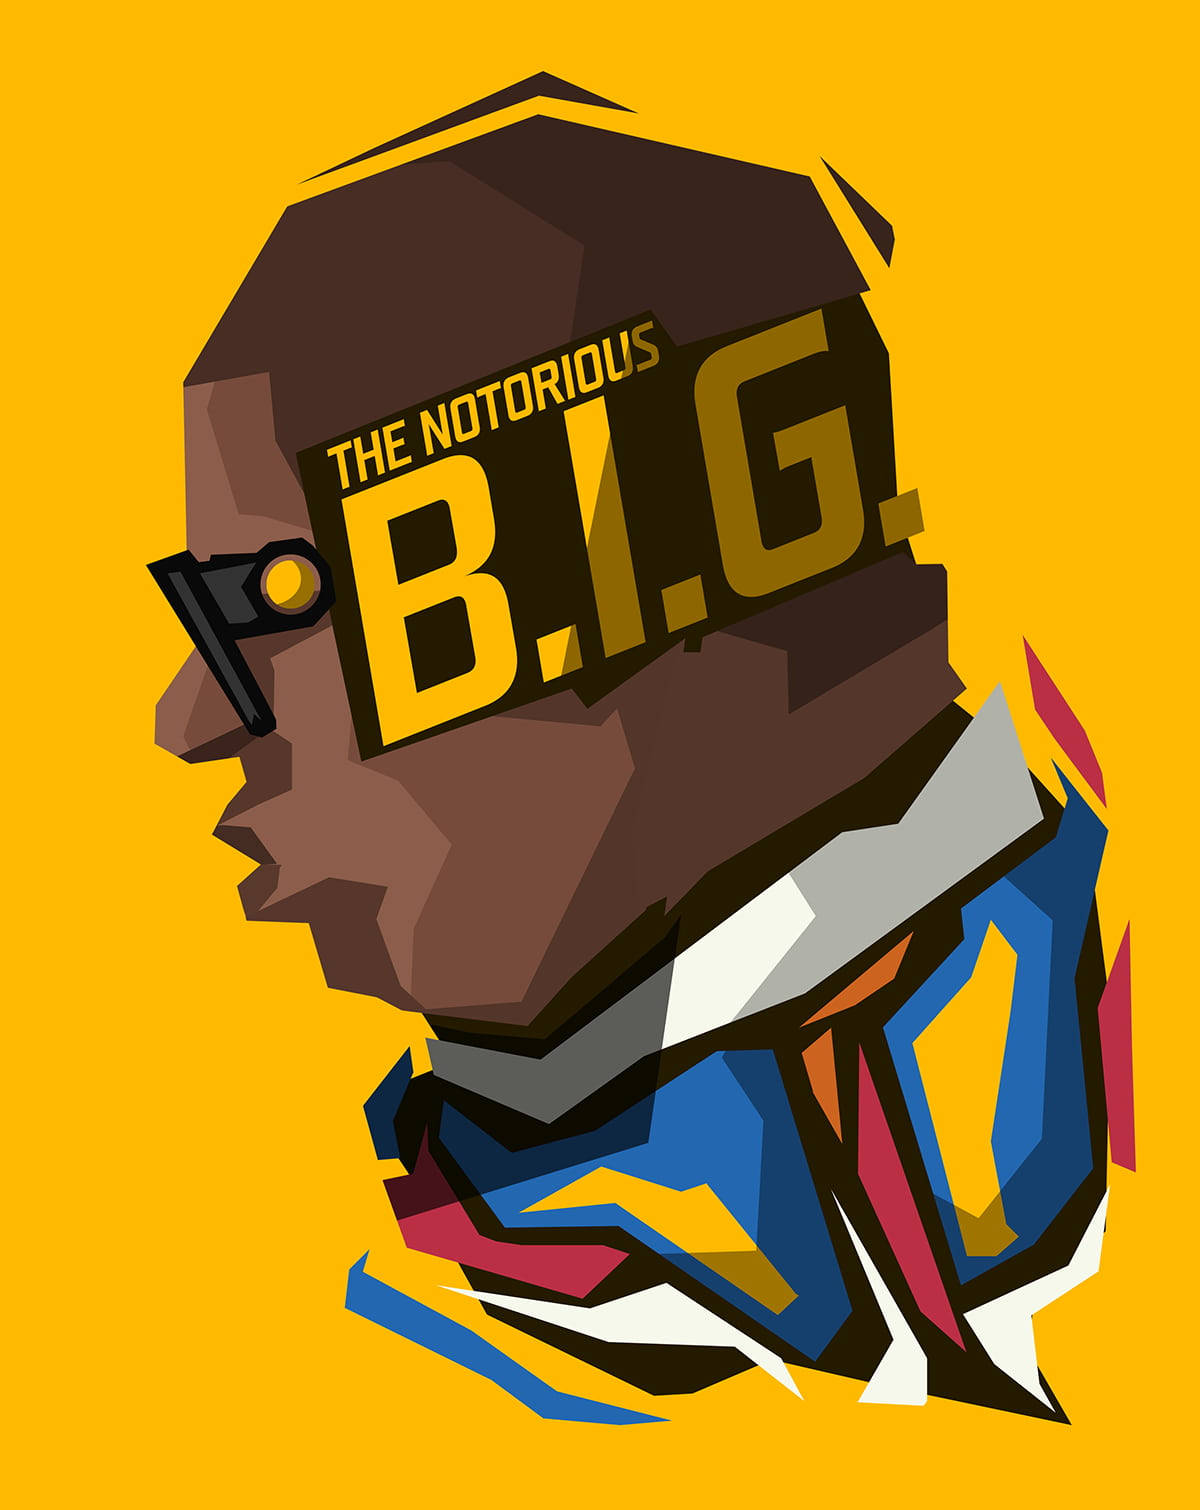 Plain Yellow Iphone The Notorious B.i.g. Wallpaper